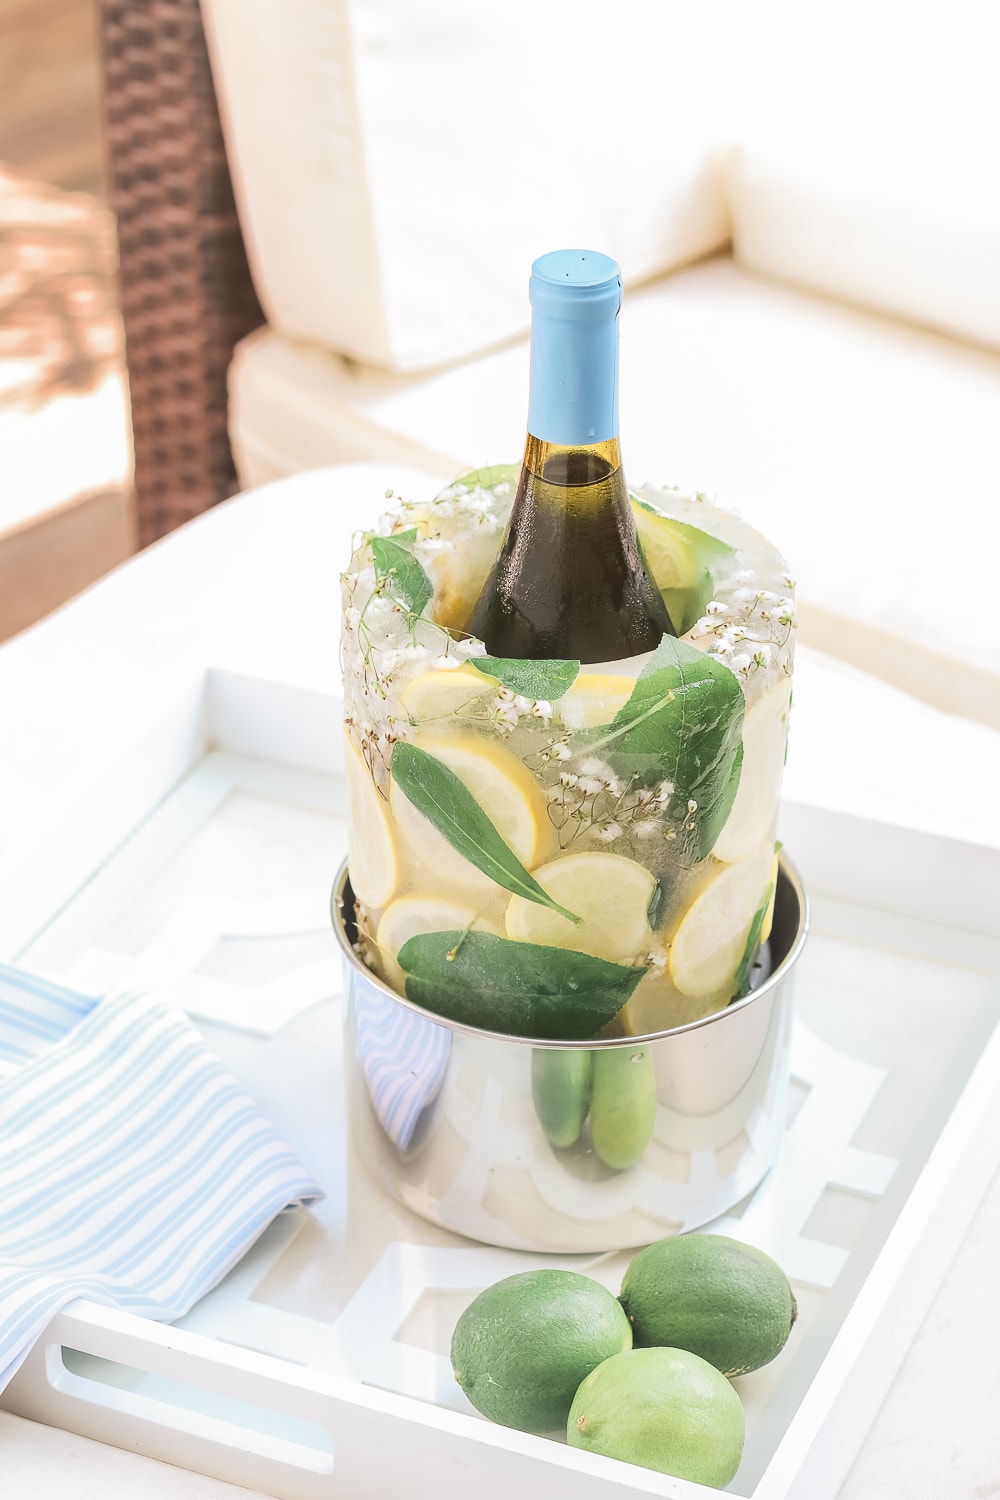 Entertaining blogger Stephanie Ziajka shares some fun ice bucket ideas for parties on Diary of a Debutante